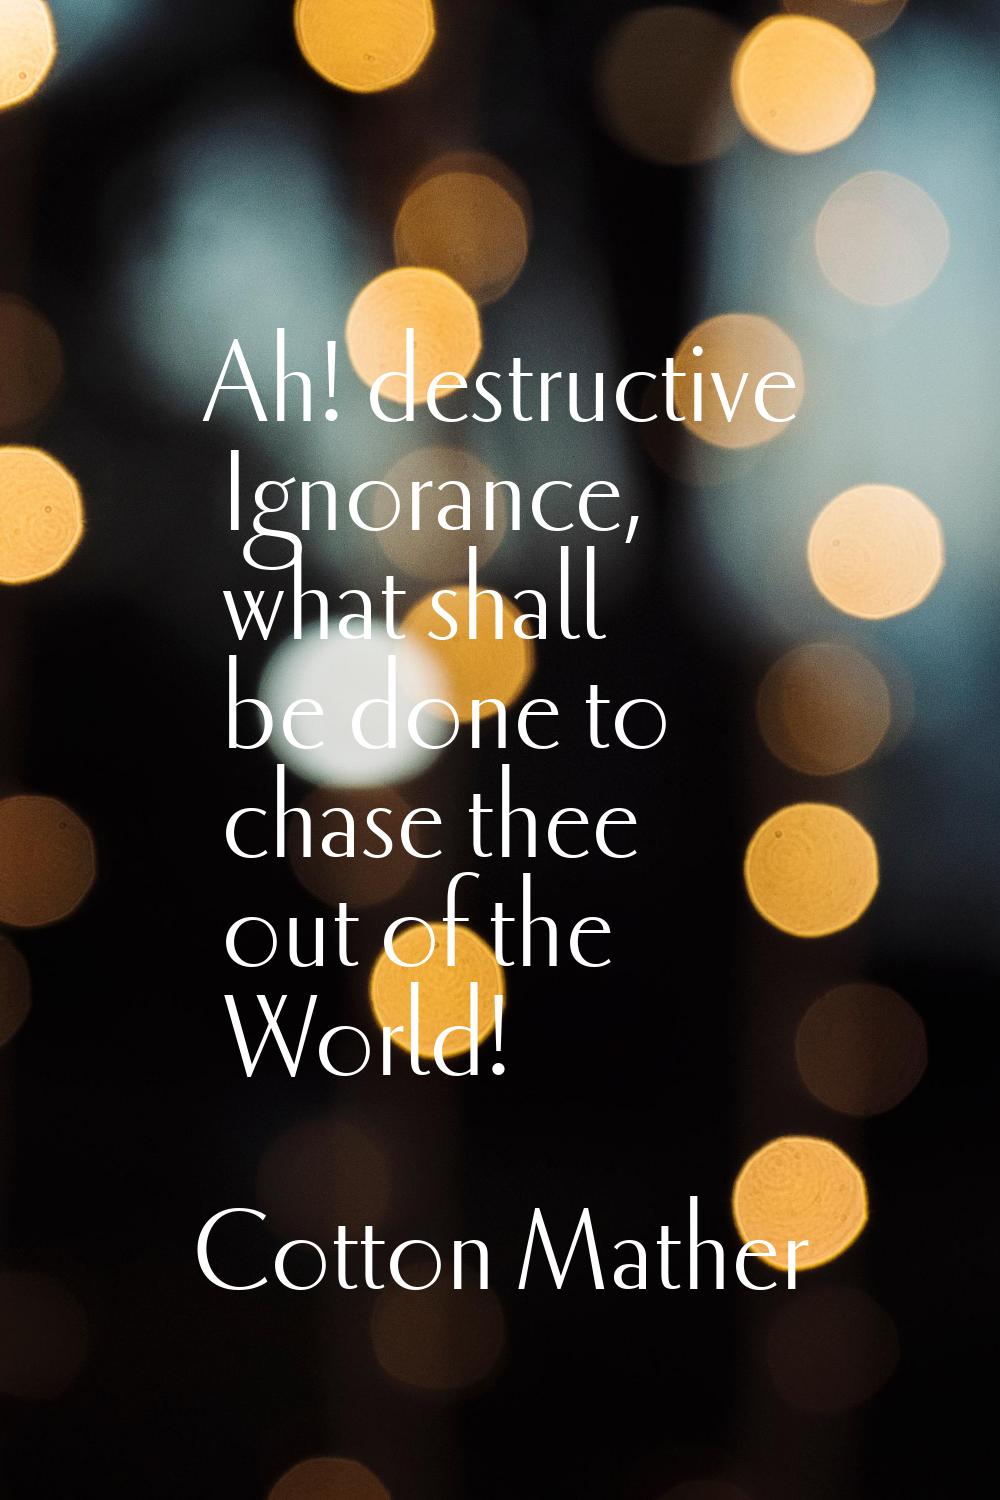 Ah! destructive Ignorance, what shall be done to chase thee out of the World!